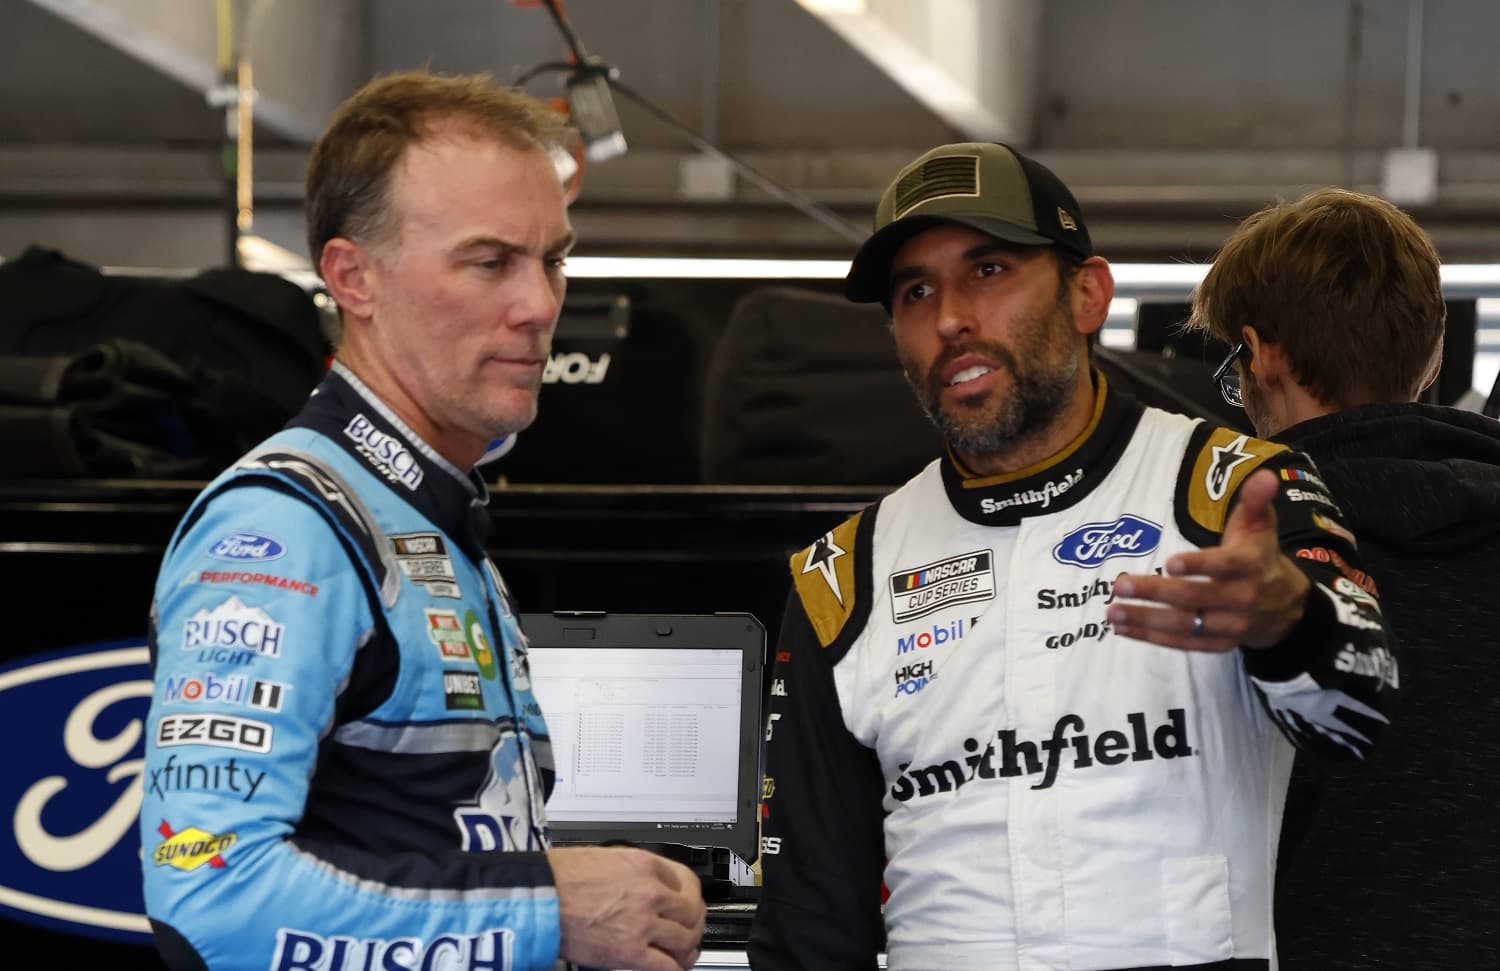 Kevin Harvick talks with Aric Almirola during NASCAR Cup Series Next Gen testing at Charlotte Motor Speedway on Nov. 17, 2021. | Grant Halverson/Getty Images